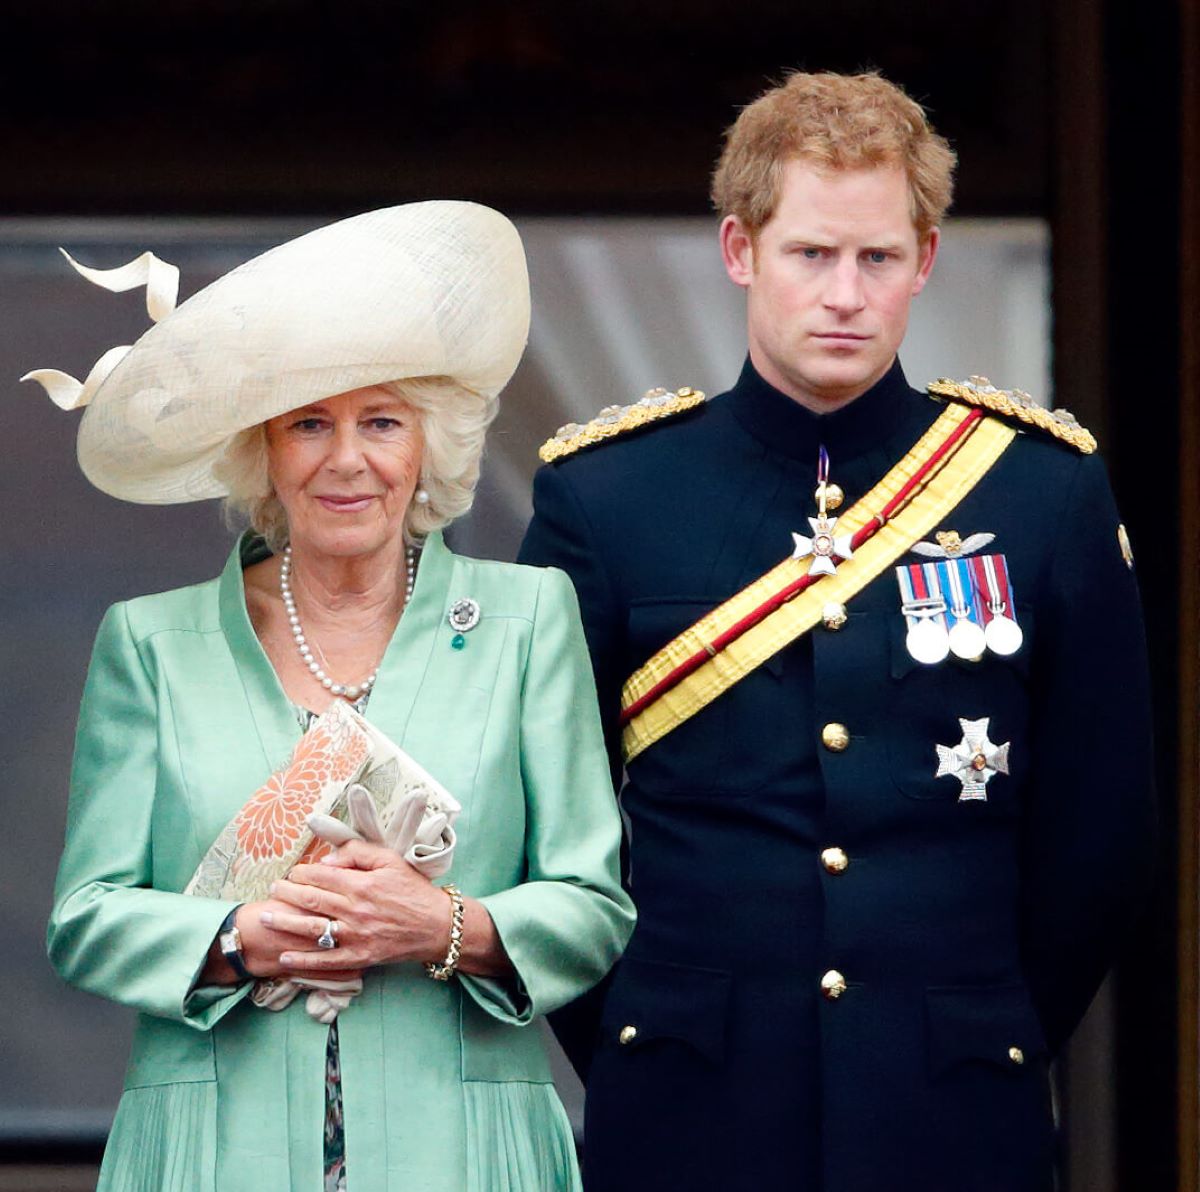 Camilla Parker Bowles (now Queen Camilla) and Prince Harry stand on the balcony of Buckingham Palace during Trooping the Colour